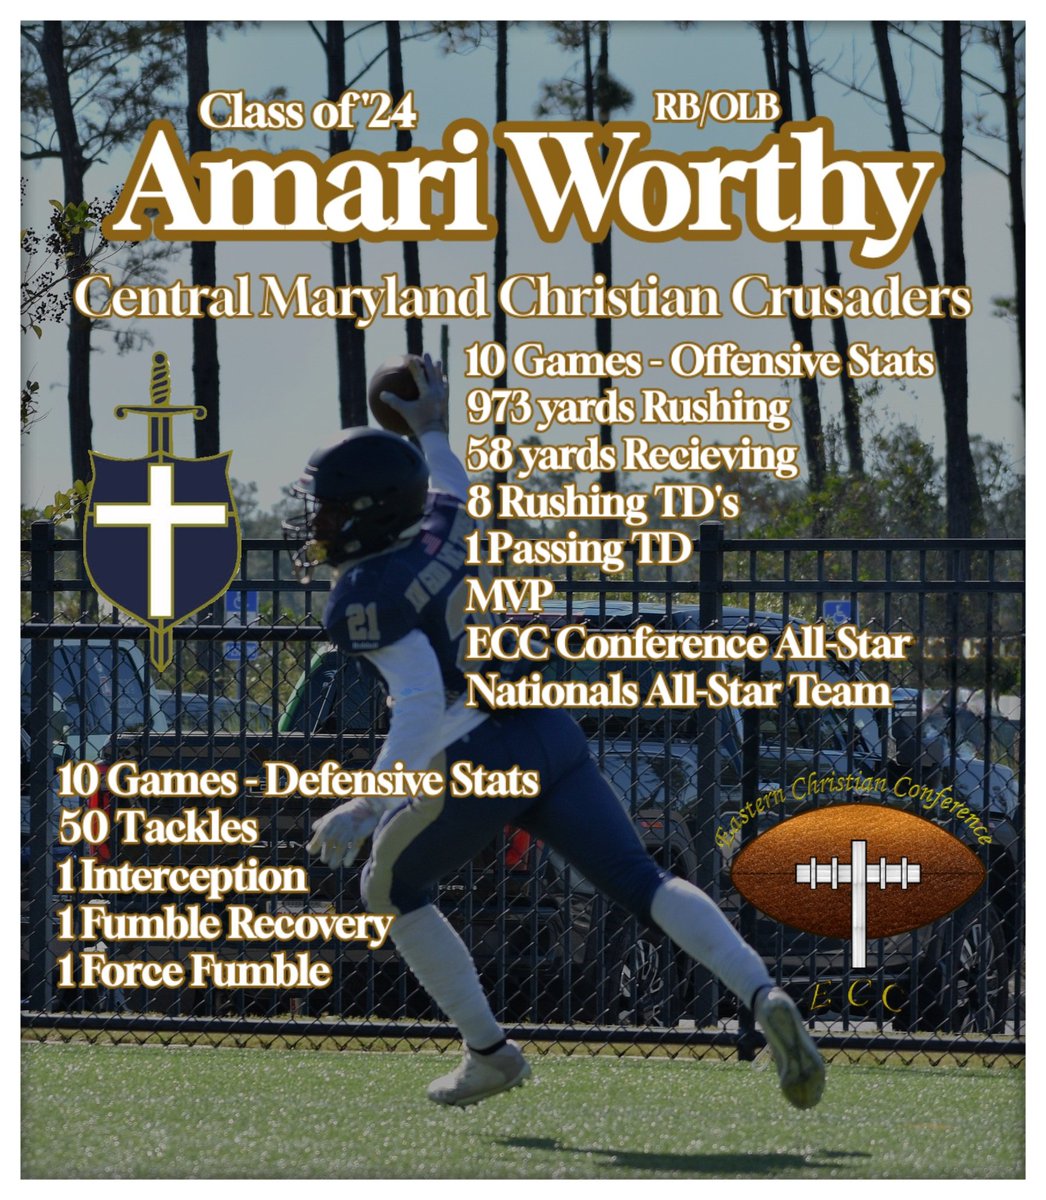 #proudparentsmoment After 11 years of playing Football, Amari finished his Senior year strong! Great Work!